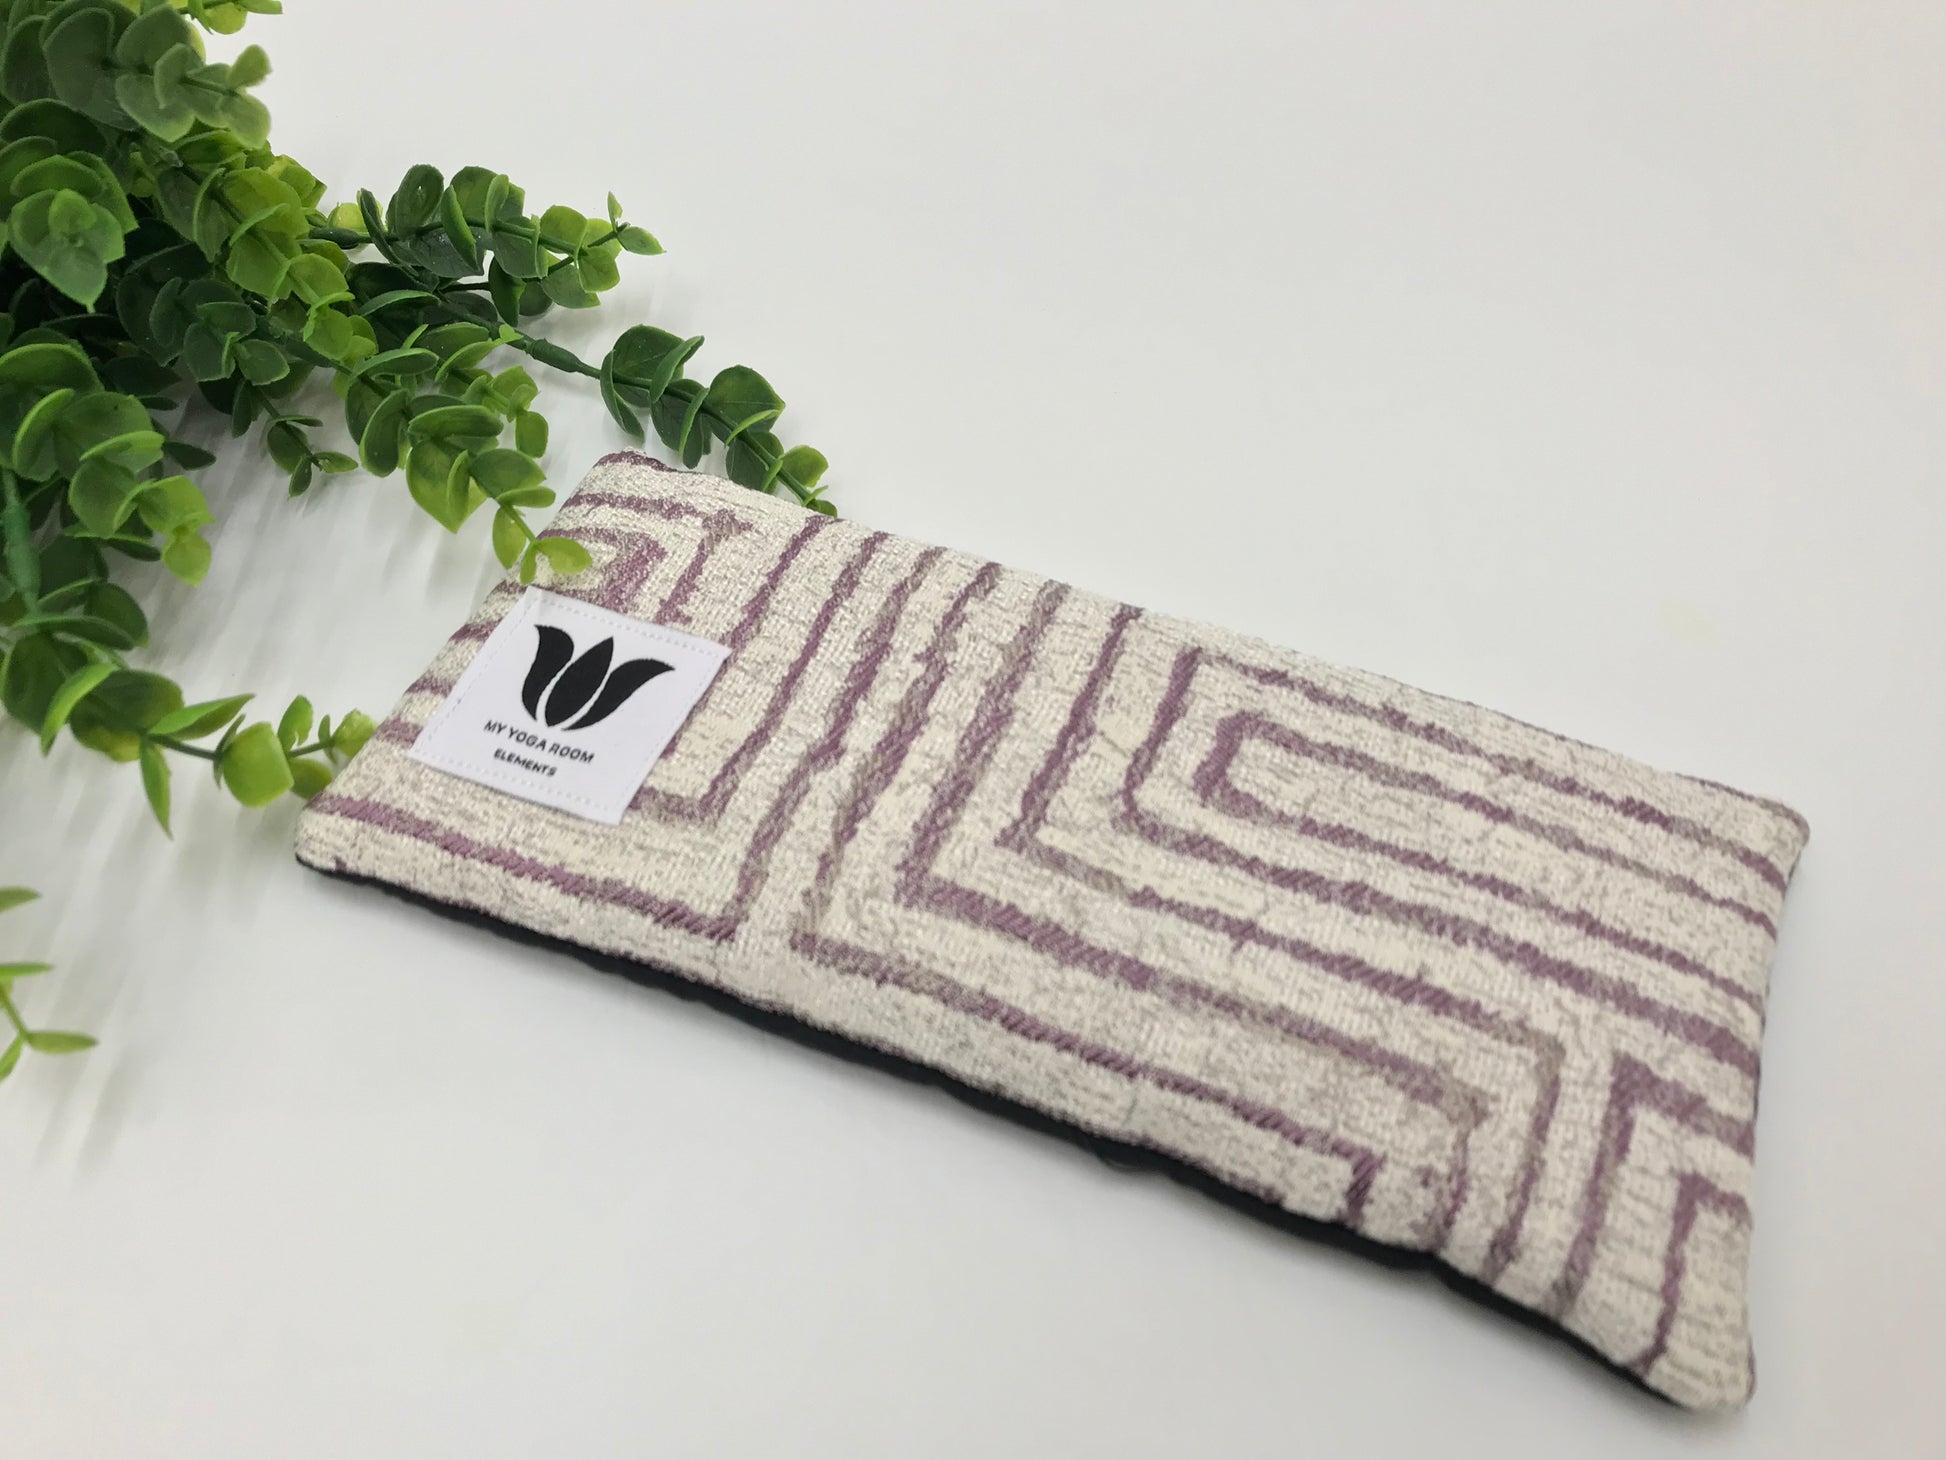 oga eye pillow, unscented, therapeutically weighted to soothe eye strain and stress or enhance your savasana. Handcrafted in Canada by My Yoga Room Elements. Purple and pearl modern print and bamboo fabric.